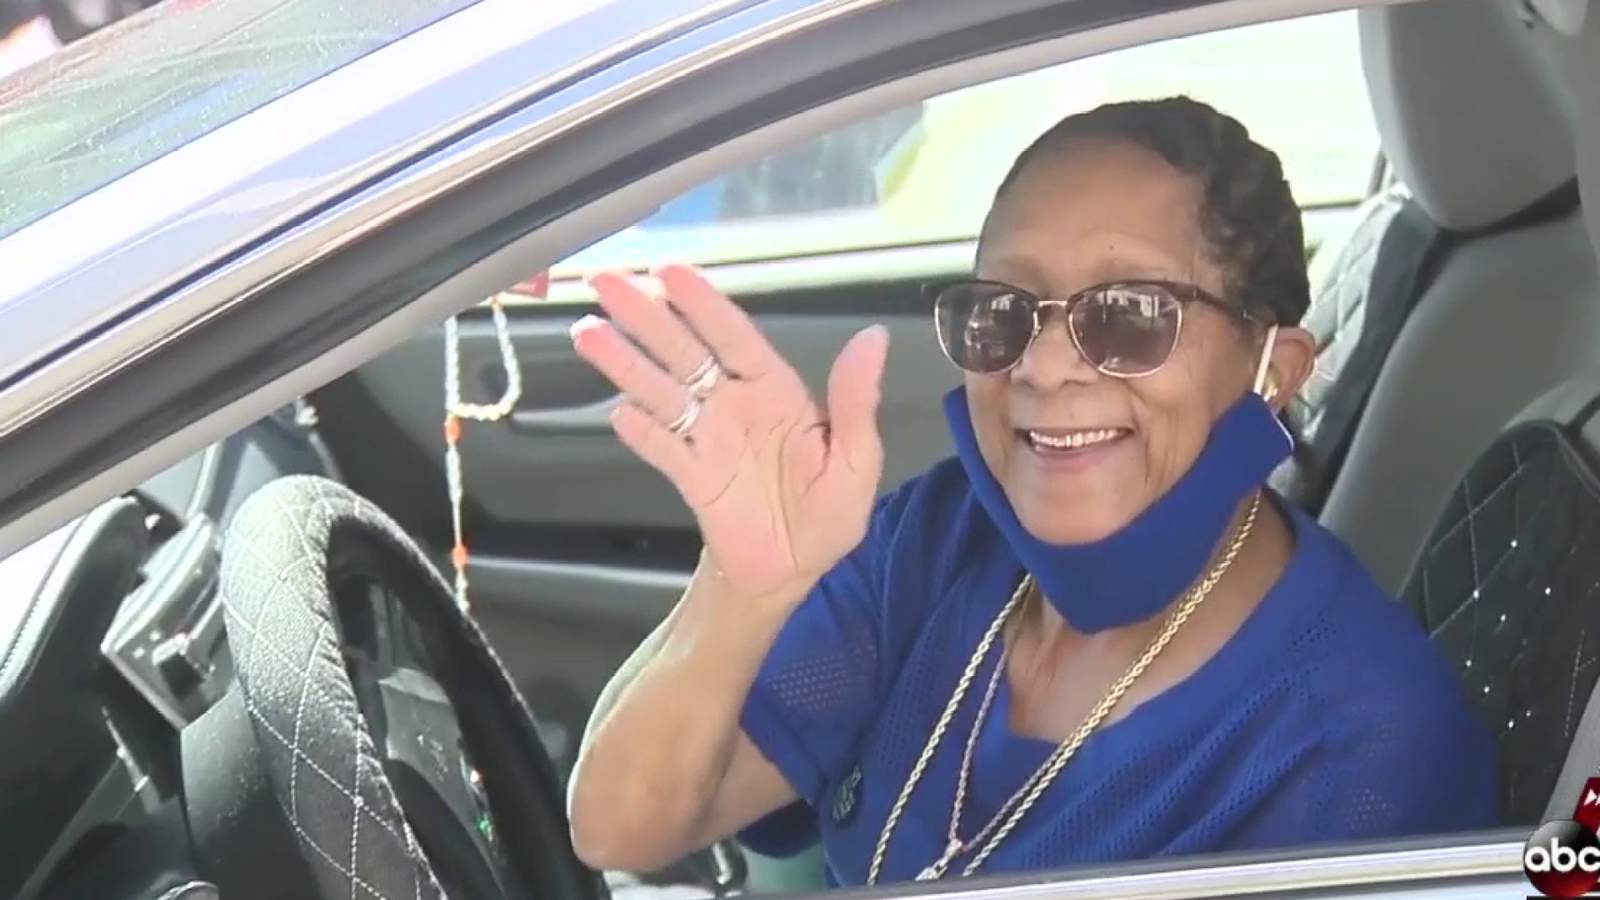 What’s Up South Texas!: Woman inspires others to act on goals through taxi service